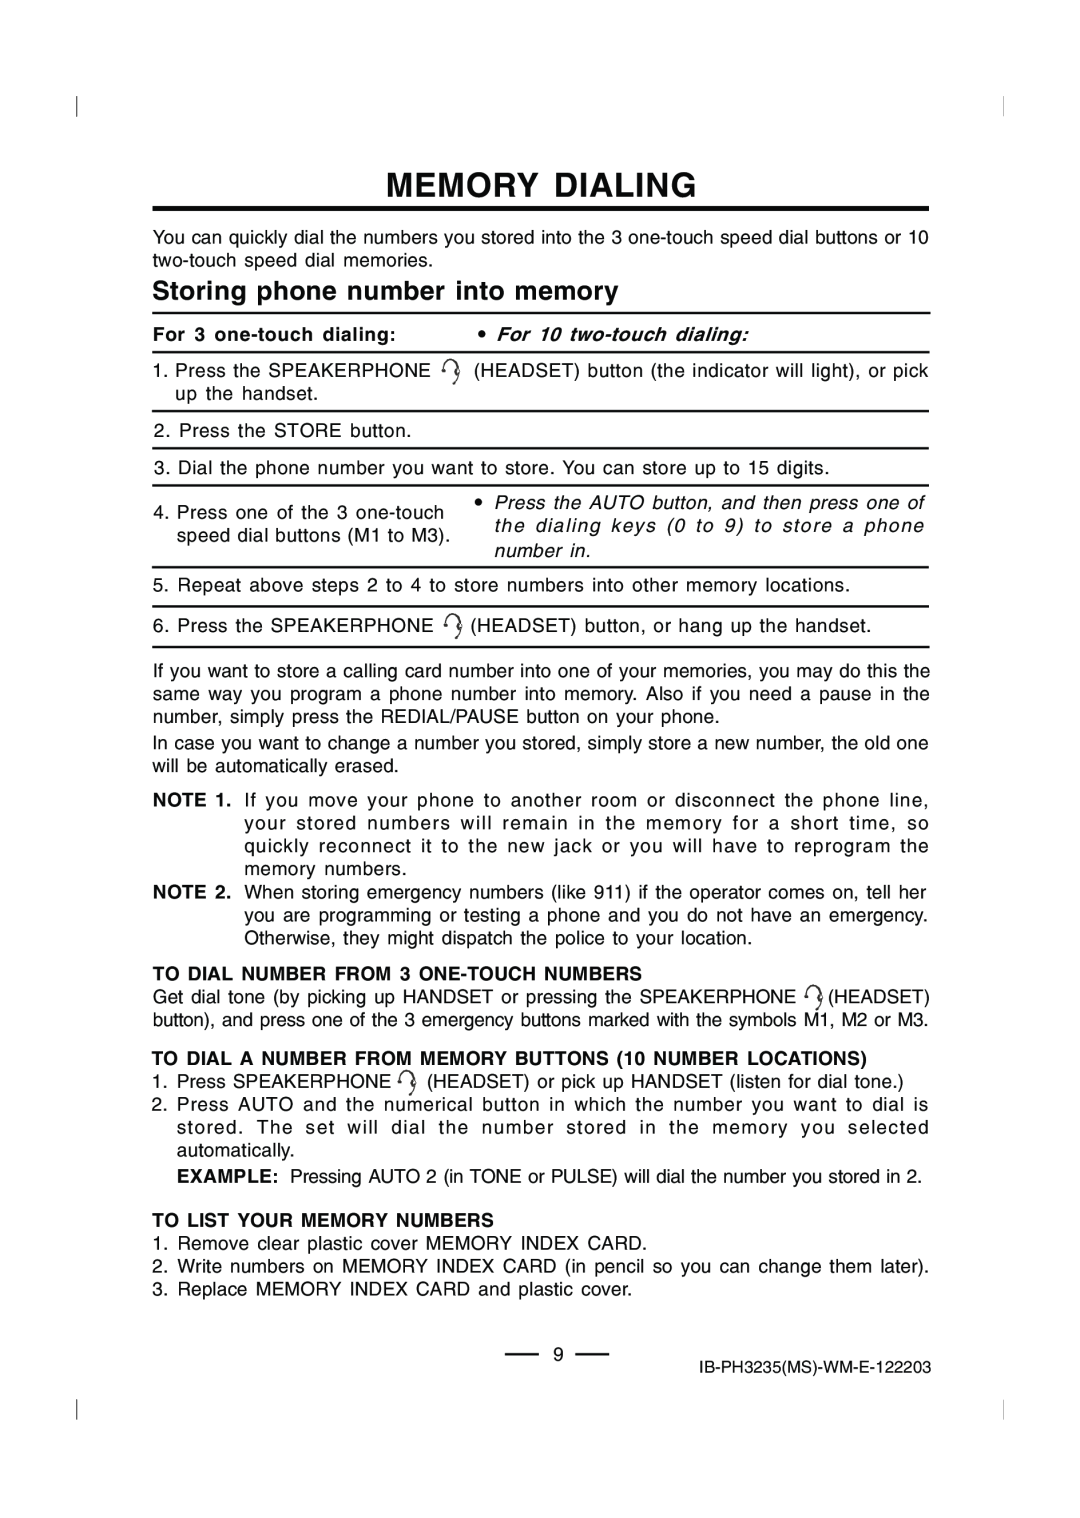 Lenoxx Electronics PH-3235 operating instructions Memory Dialing, Storing phone number into memory 